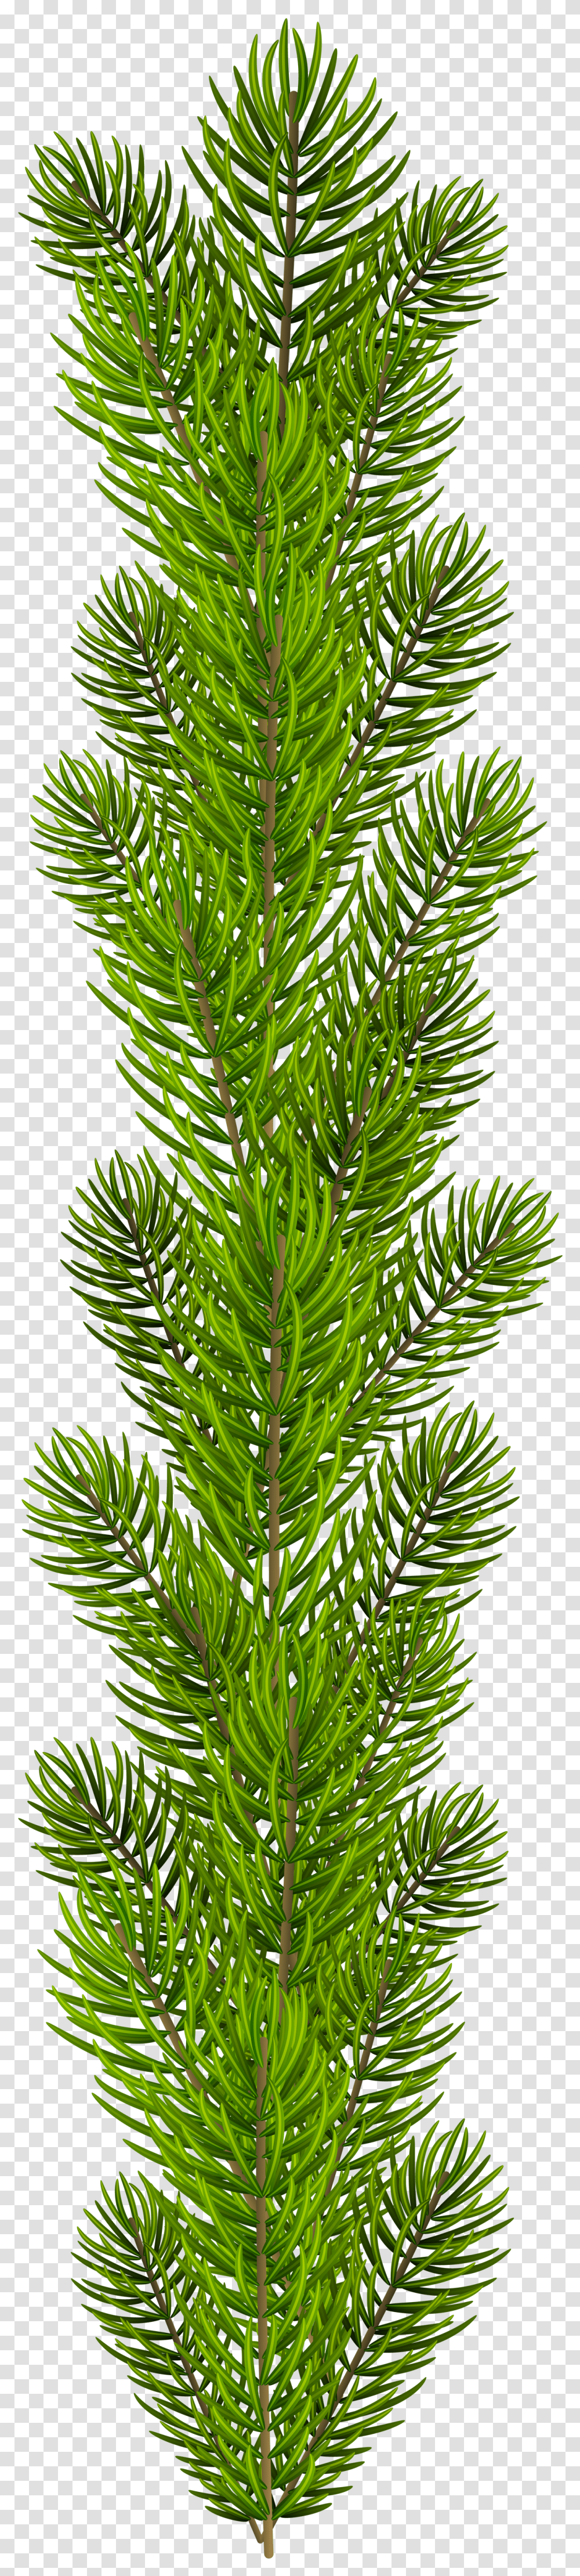 Pine Branches Clipart Pine Tree Branches Transparent Png